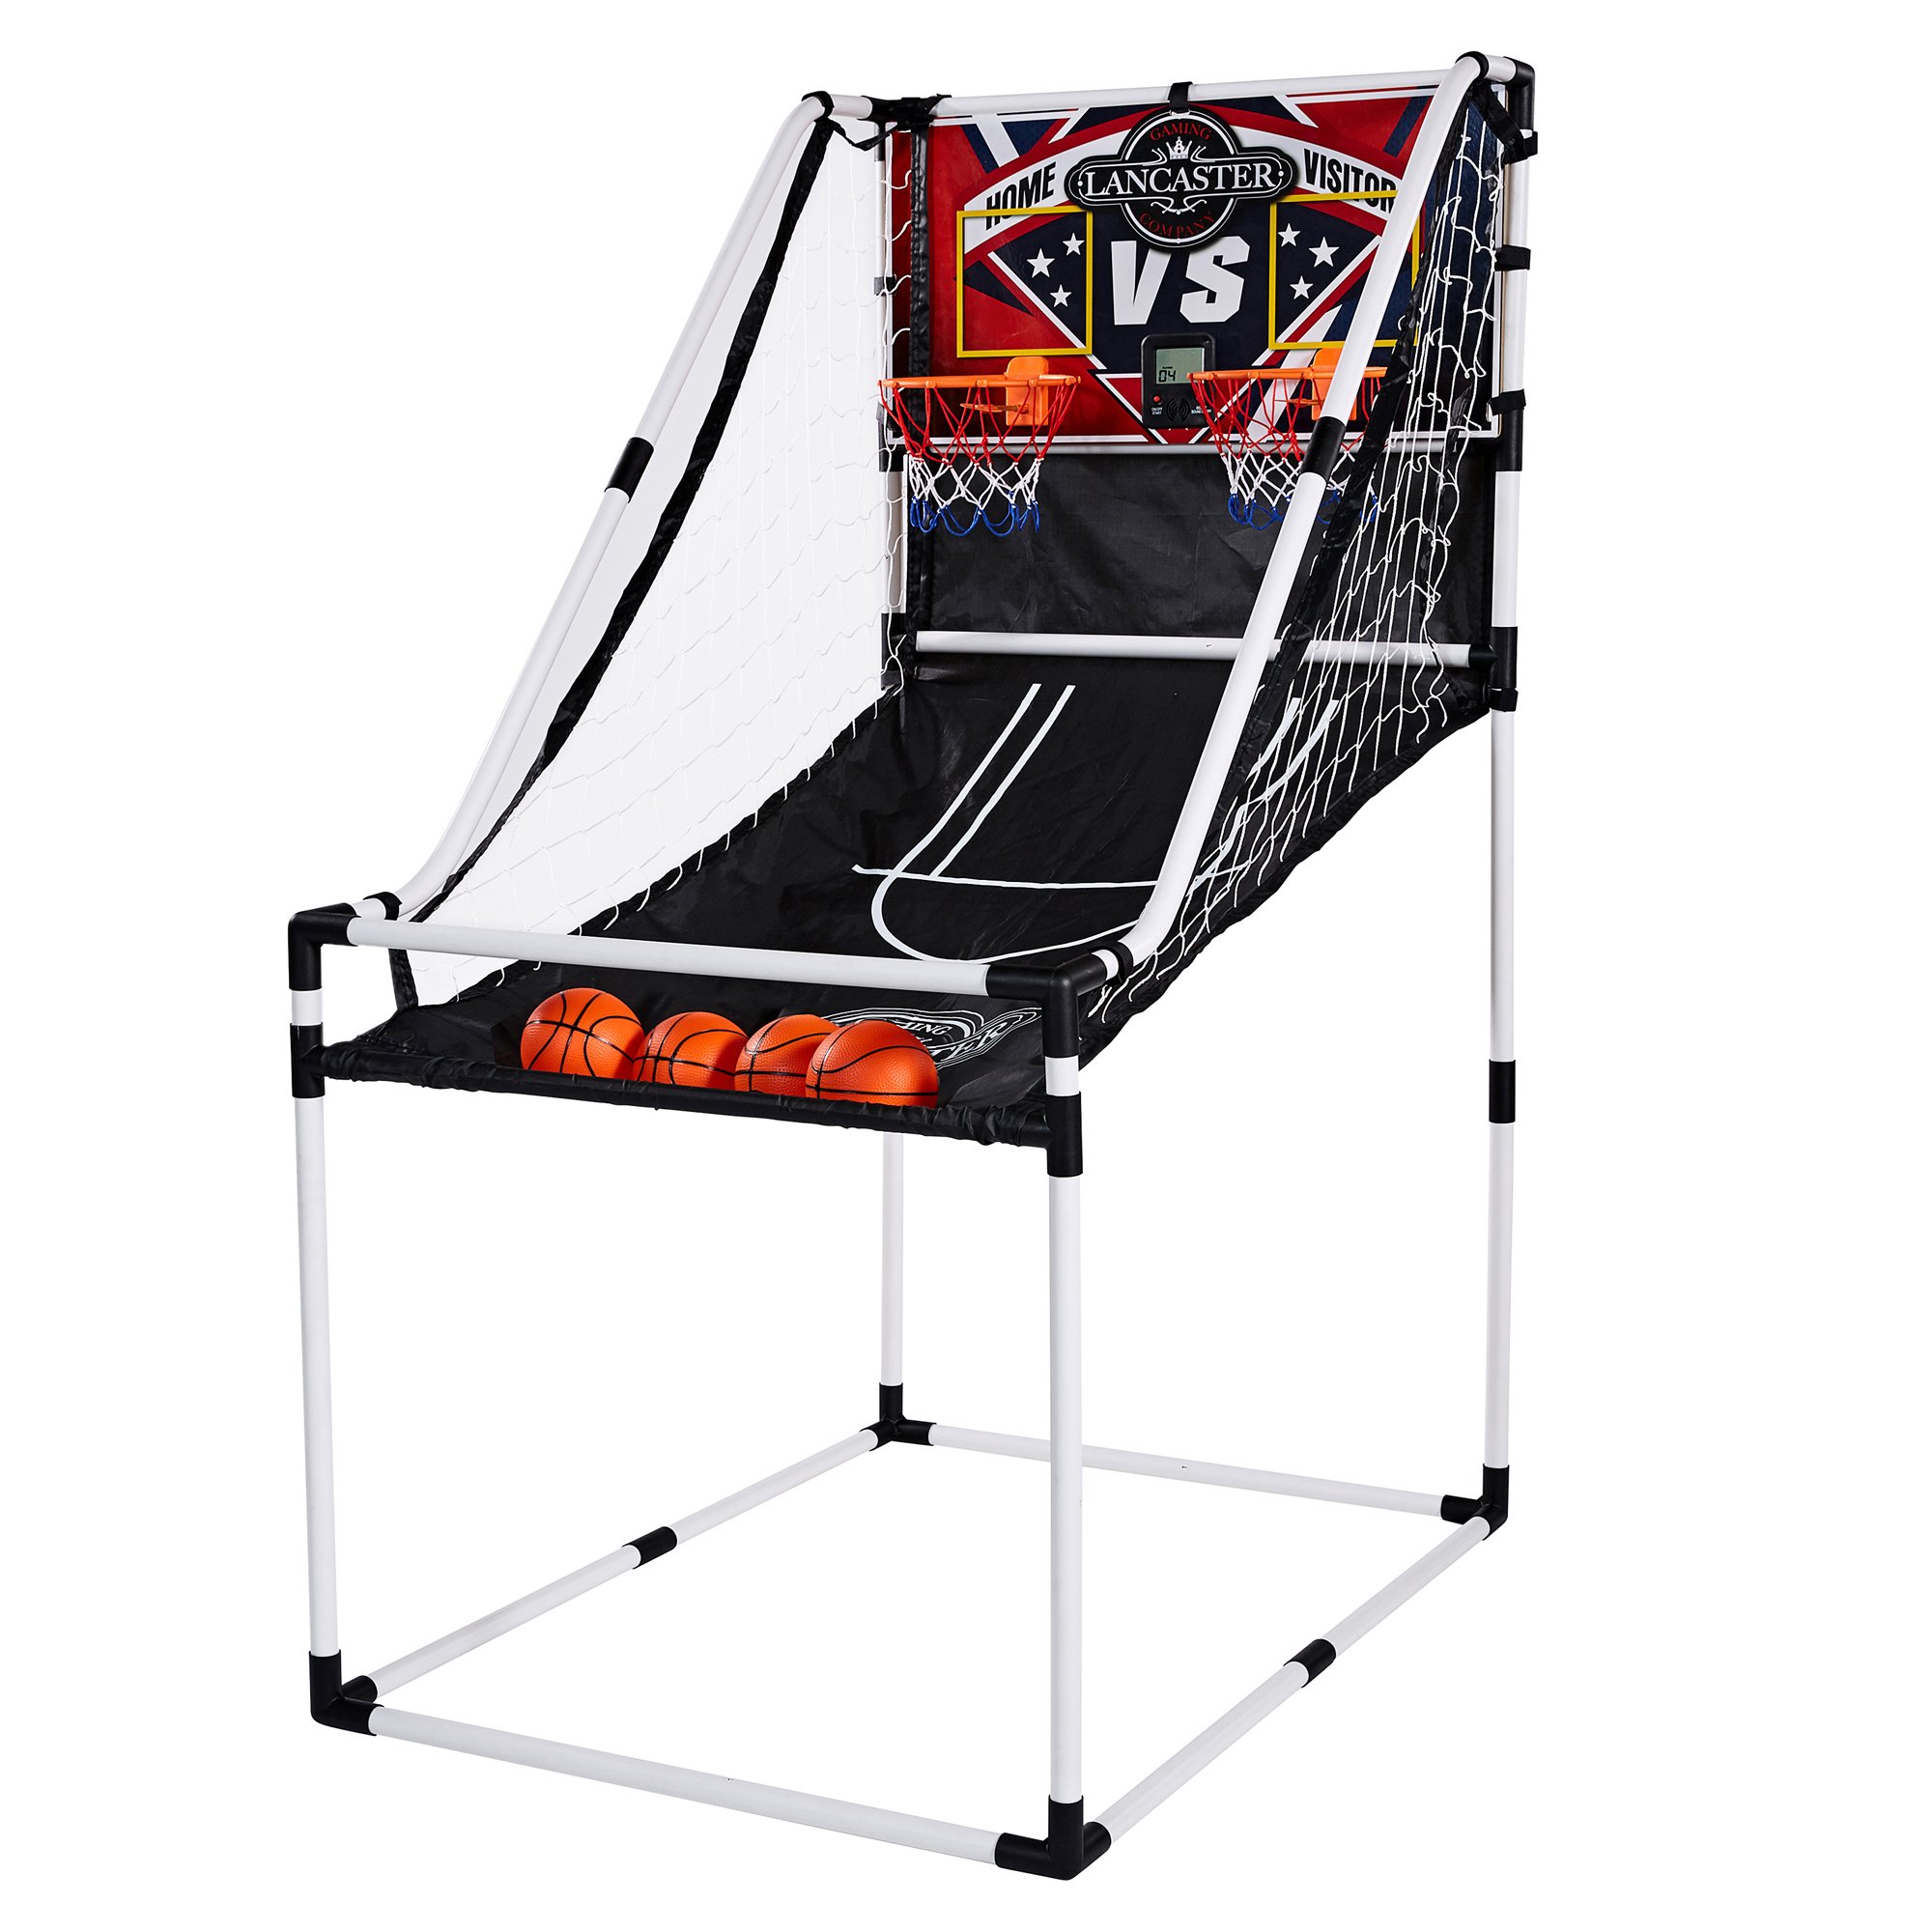 E-Jet Games 2 Player Battery Operated Basketball Arcade Game